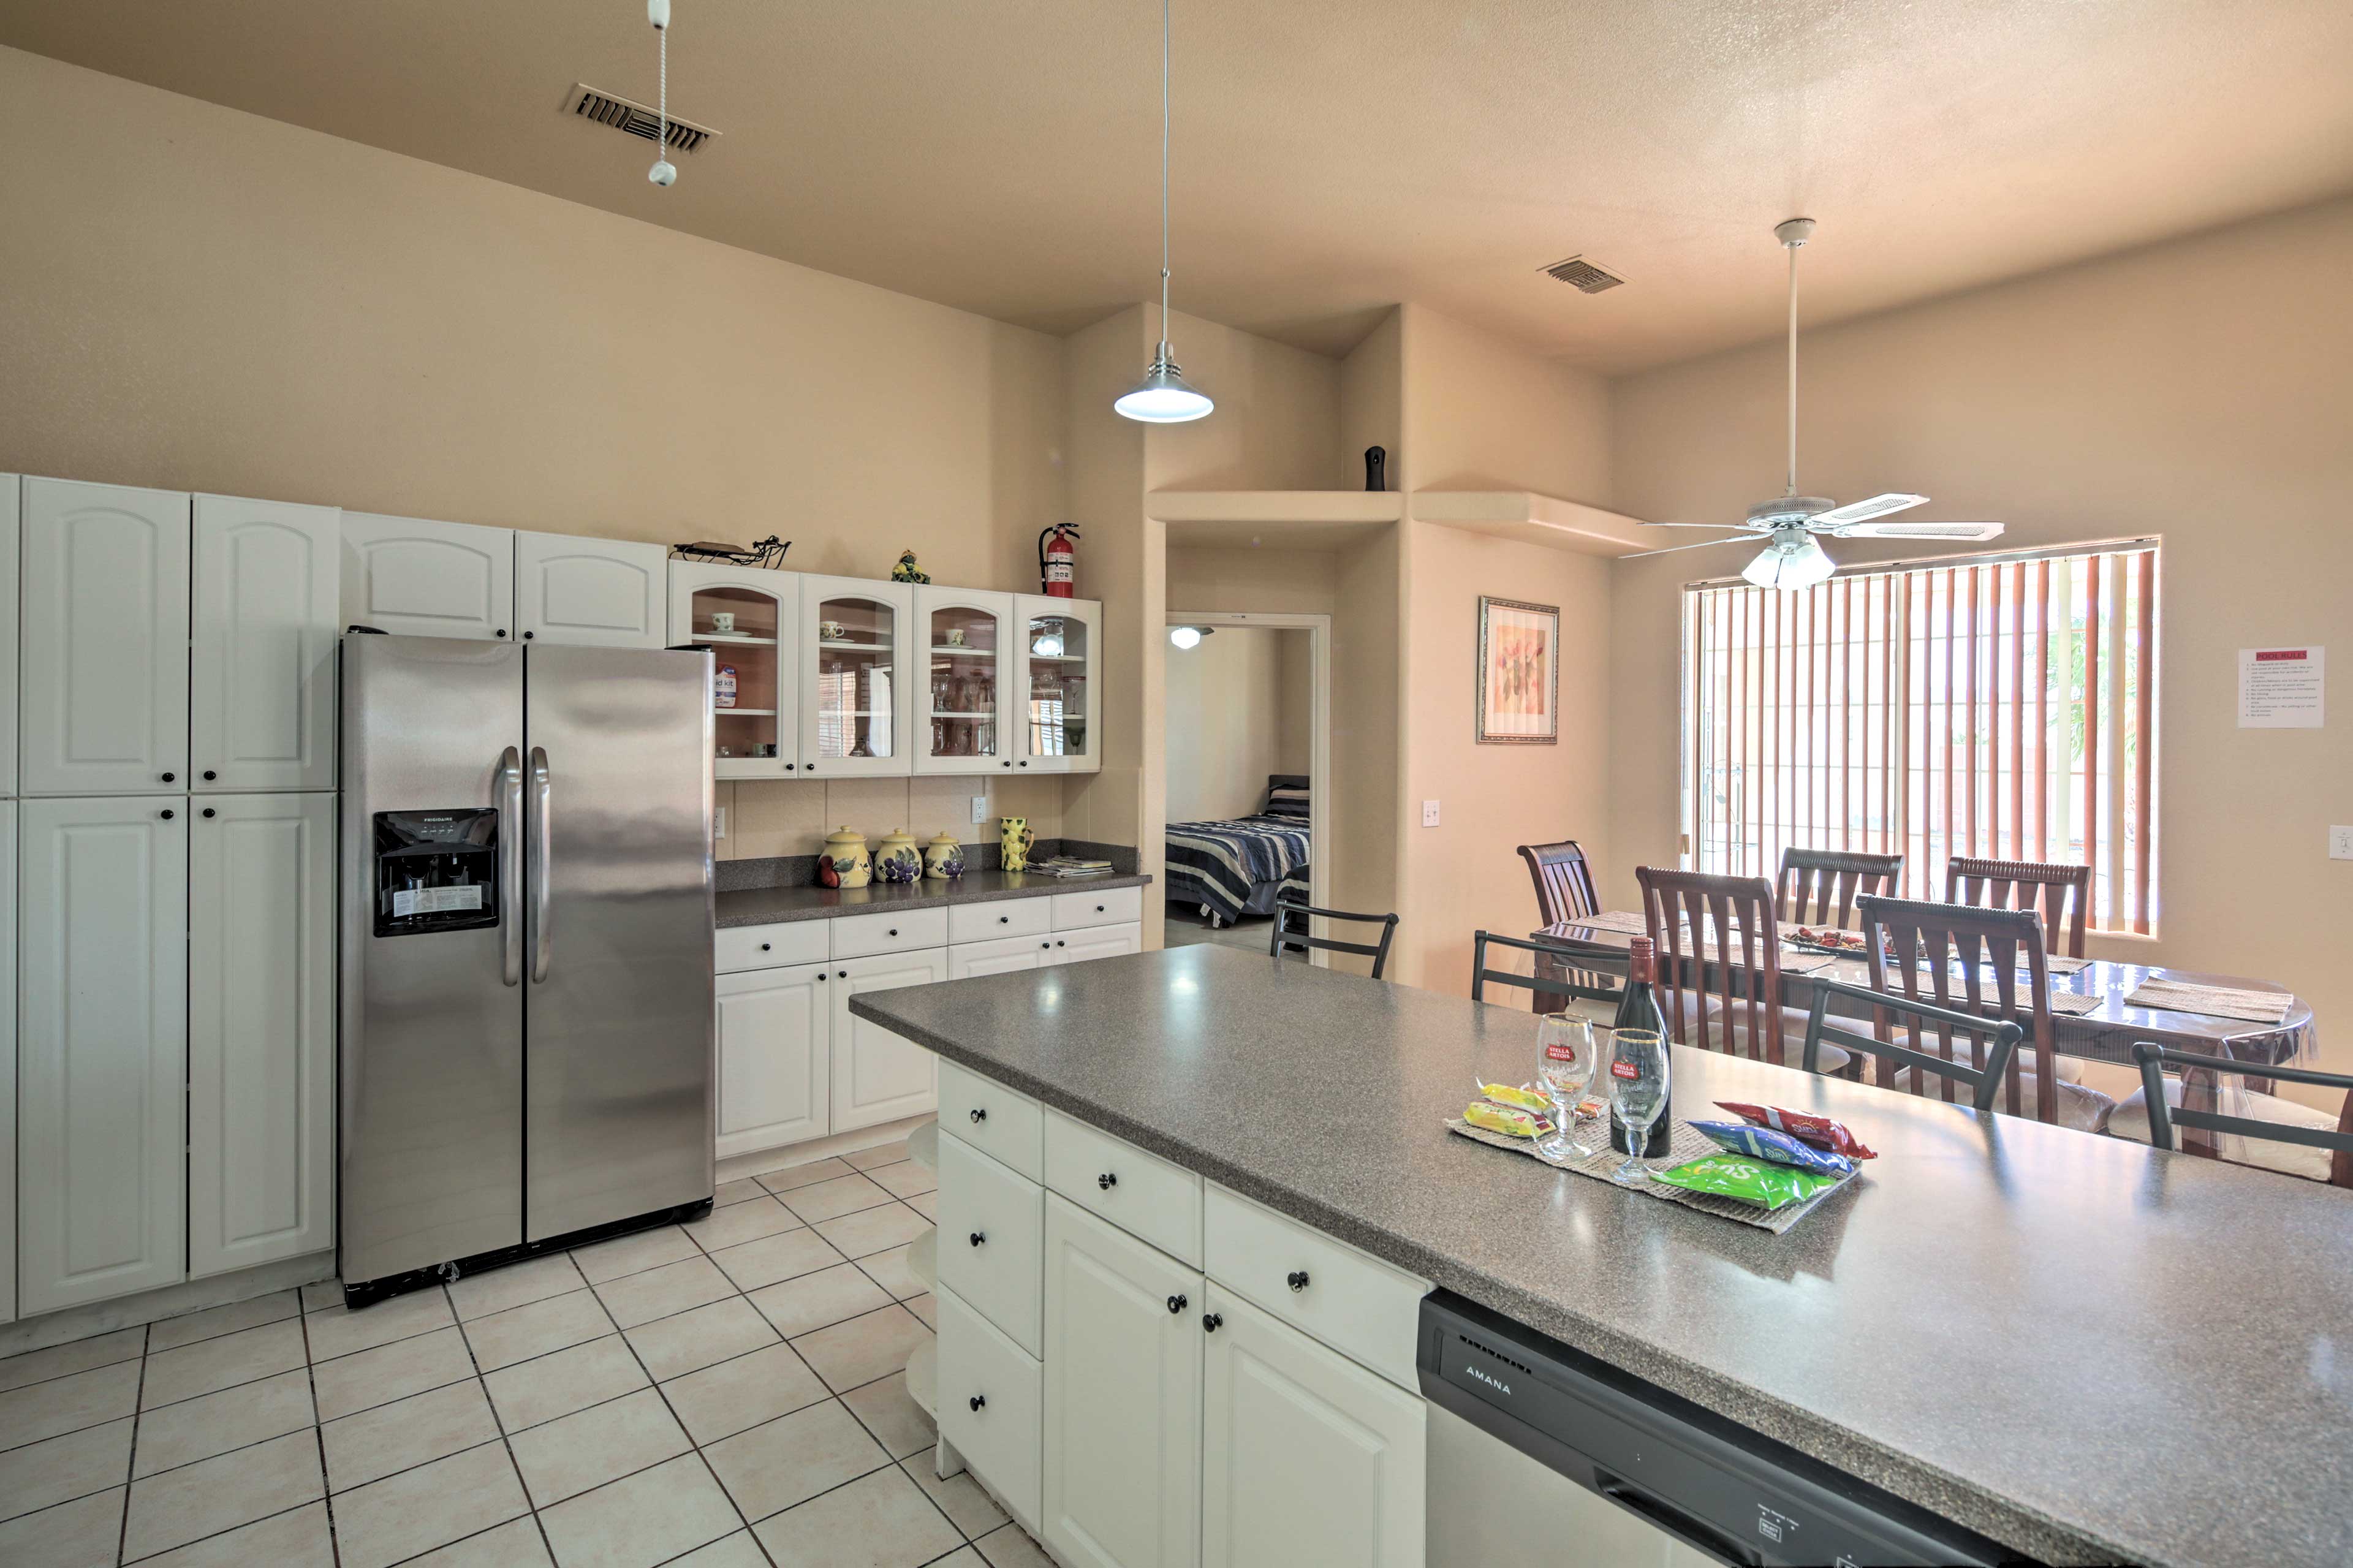 The kitchen offers stainless steel appliances and tons of counter space.